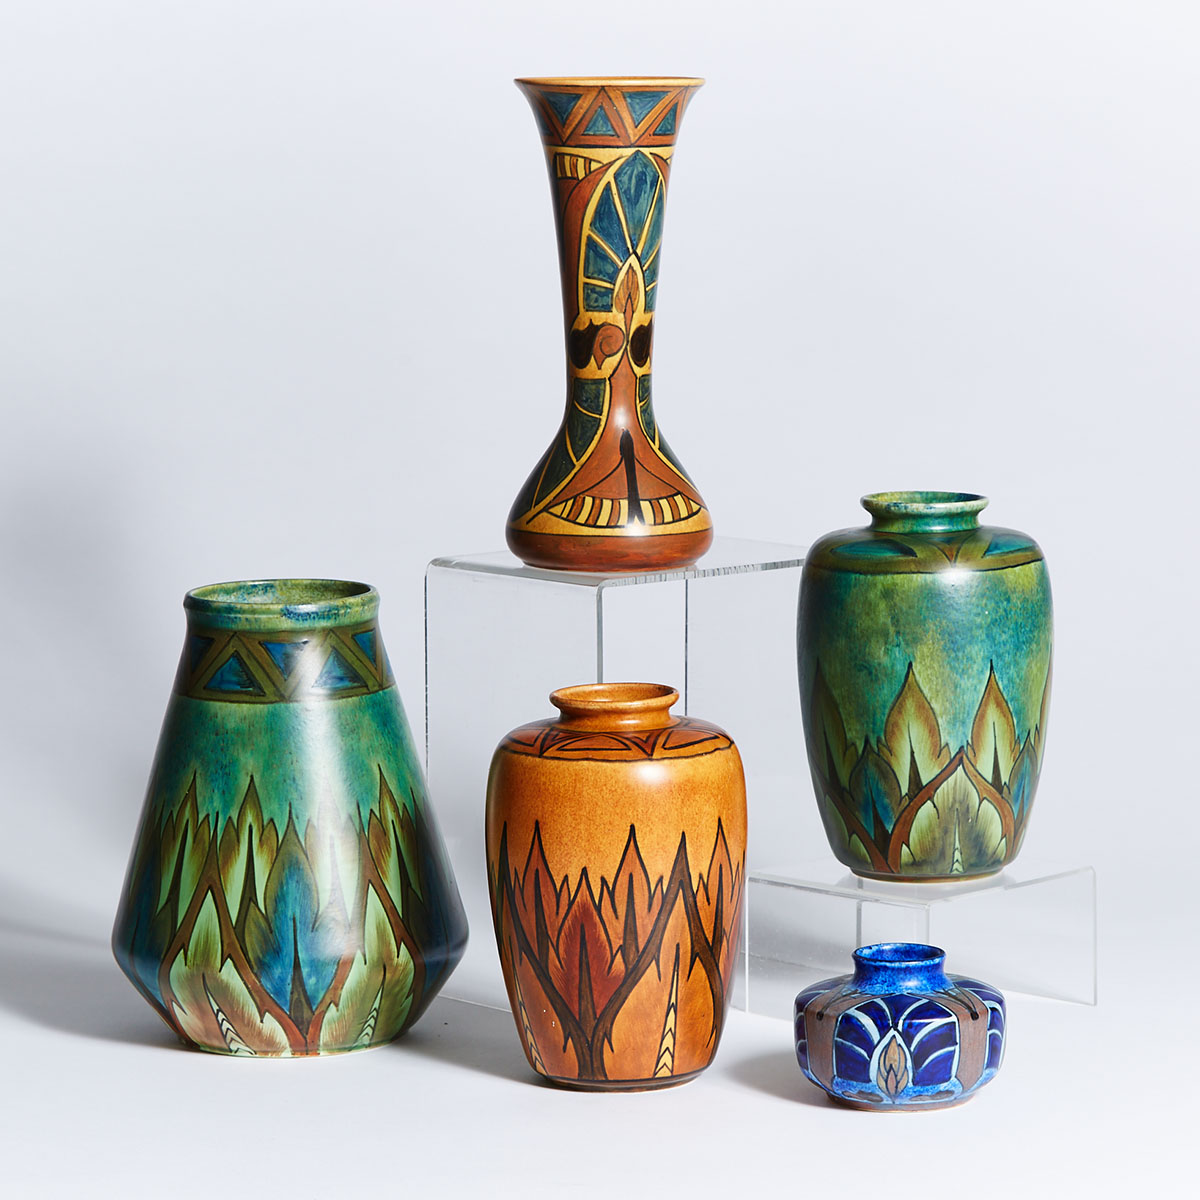 Five Clews ‘Chameleon Ware’ Vases, early 20th century